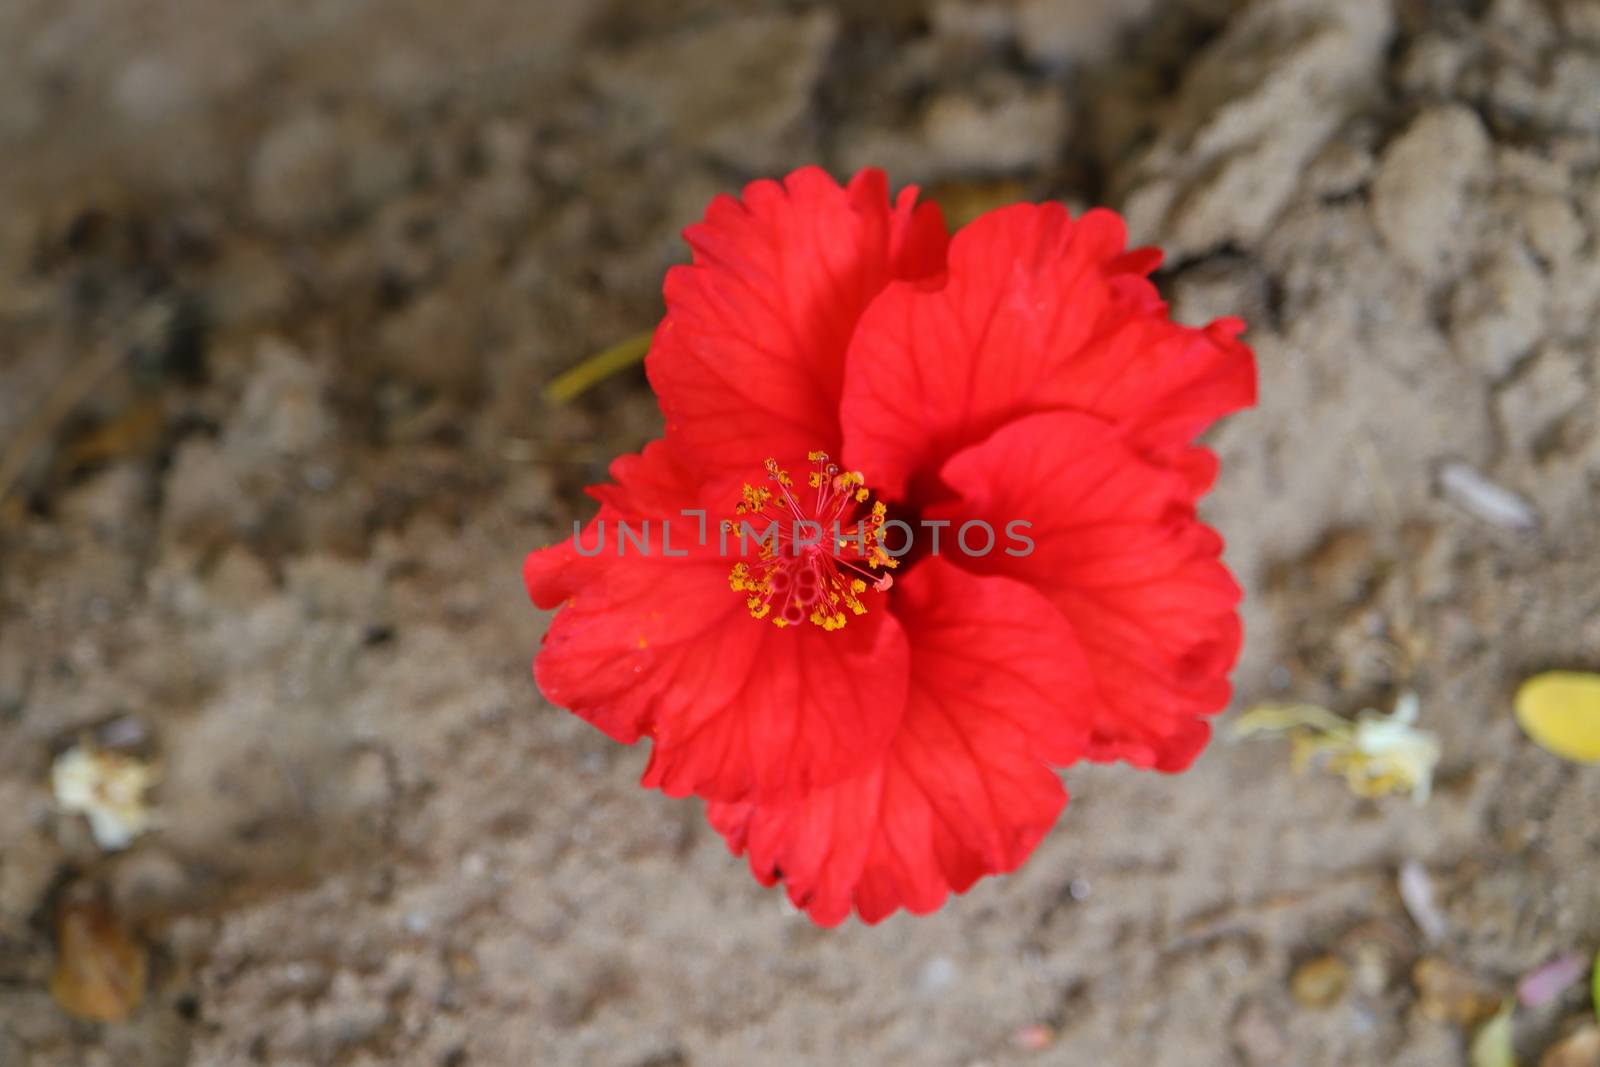 royalty free flower image ,red hibiscus flower laying on ground, hd image